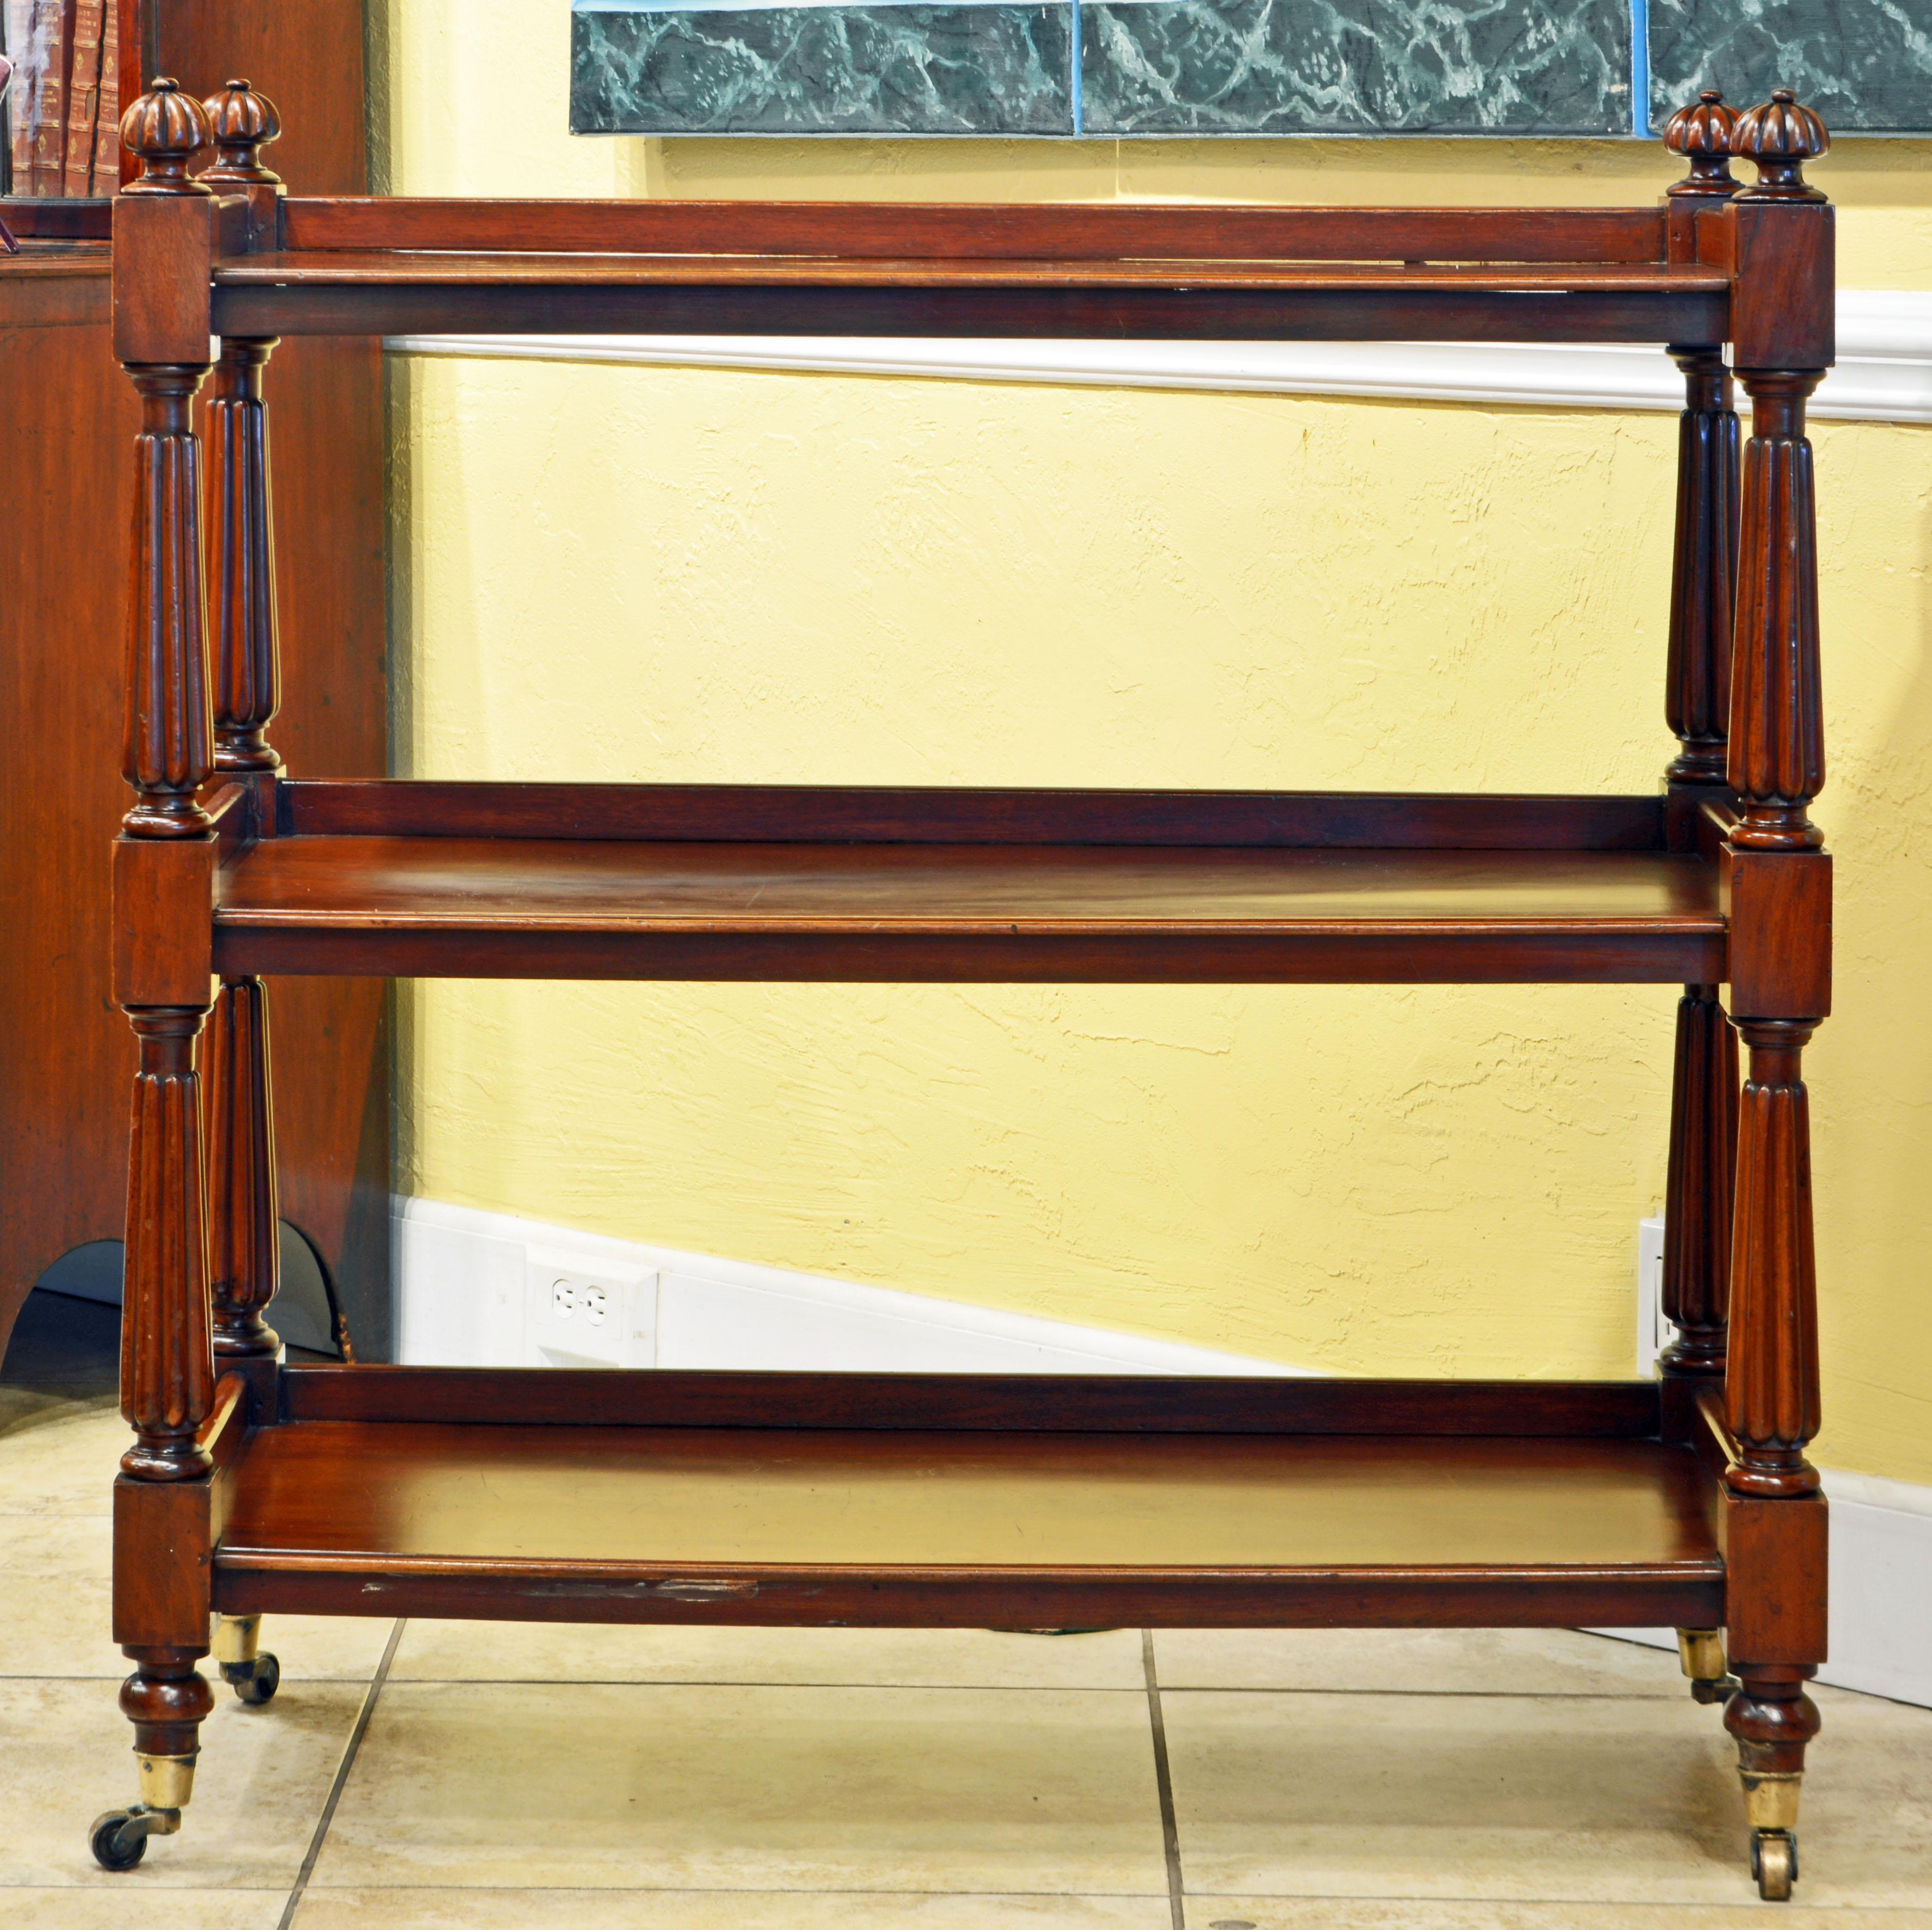 This fine William IV mahogany trolley features three edged tiers supported by four turned and carved legs surmounted by carved rosettes and resting on brass castors. The mahogany is of prime quality with a warm polished patina. Note that also the